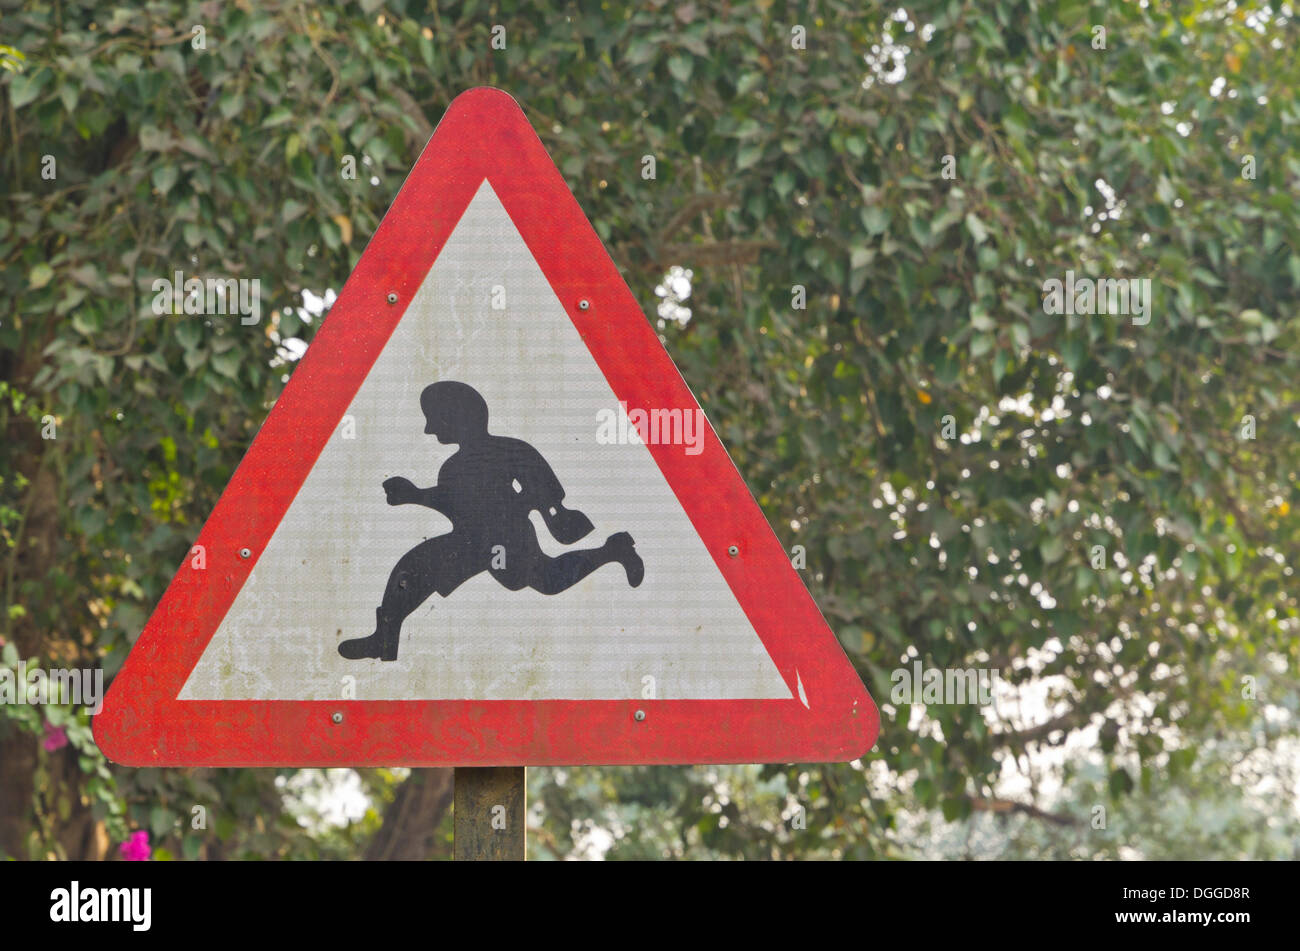 Traffic sign showing a running person, Jorhat, India, Asia Stock Photo